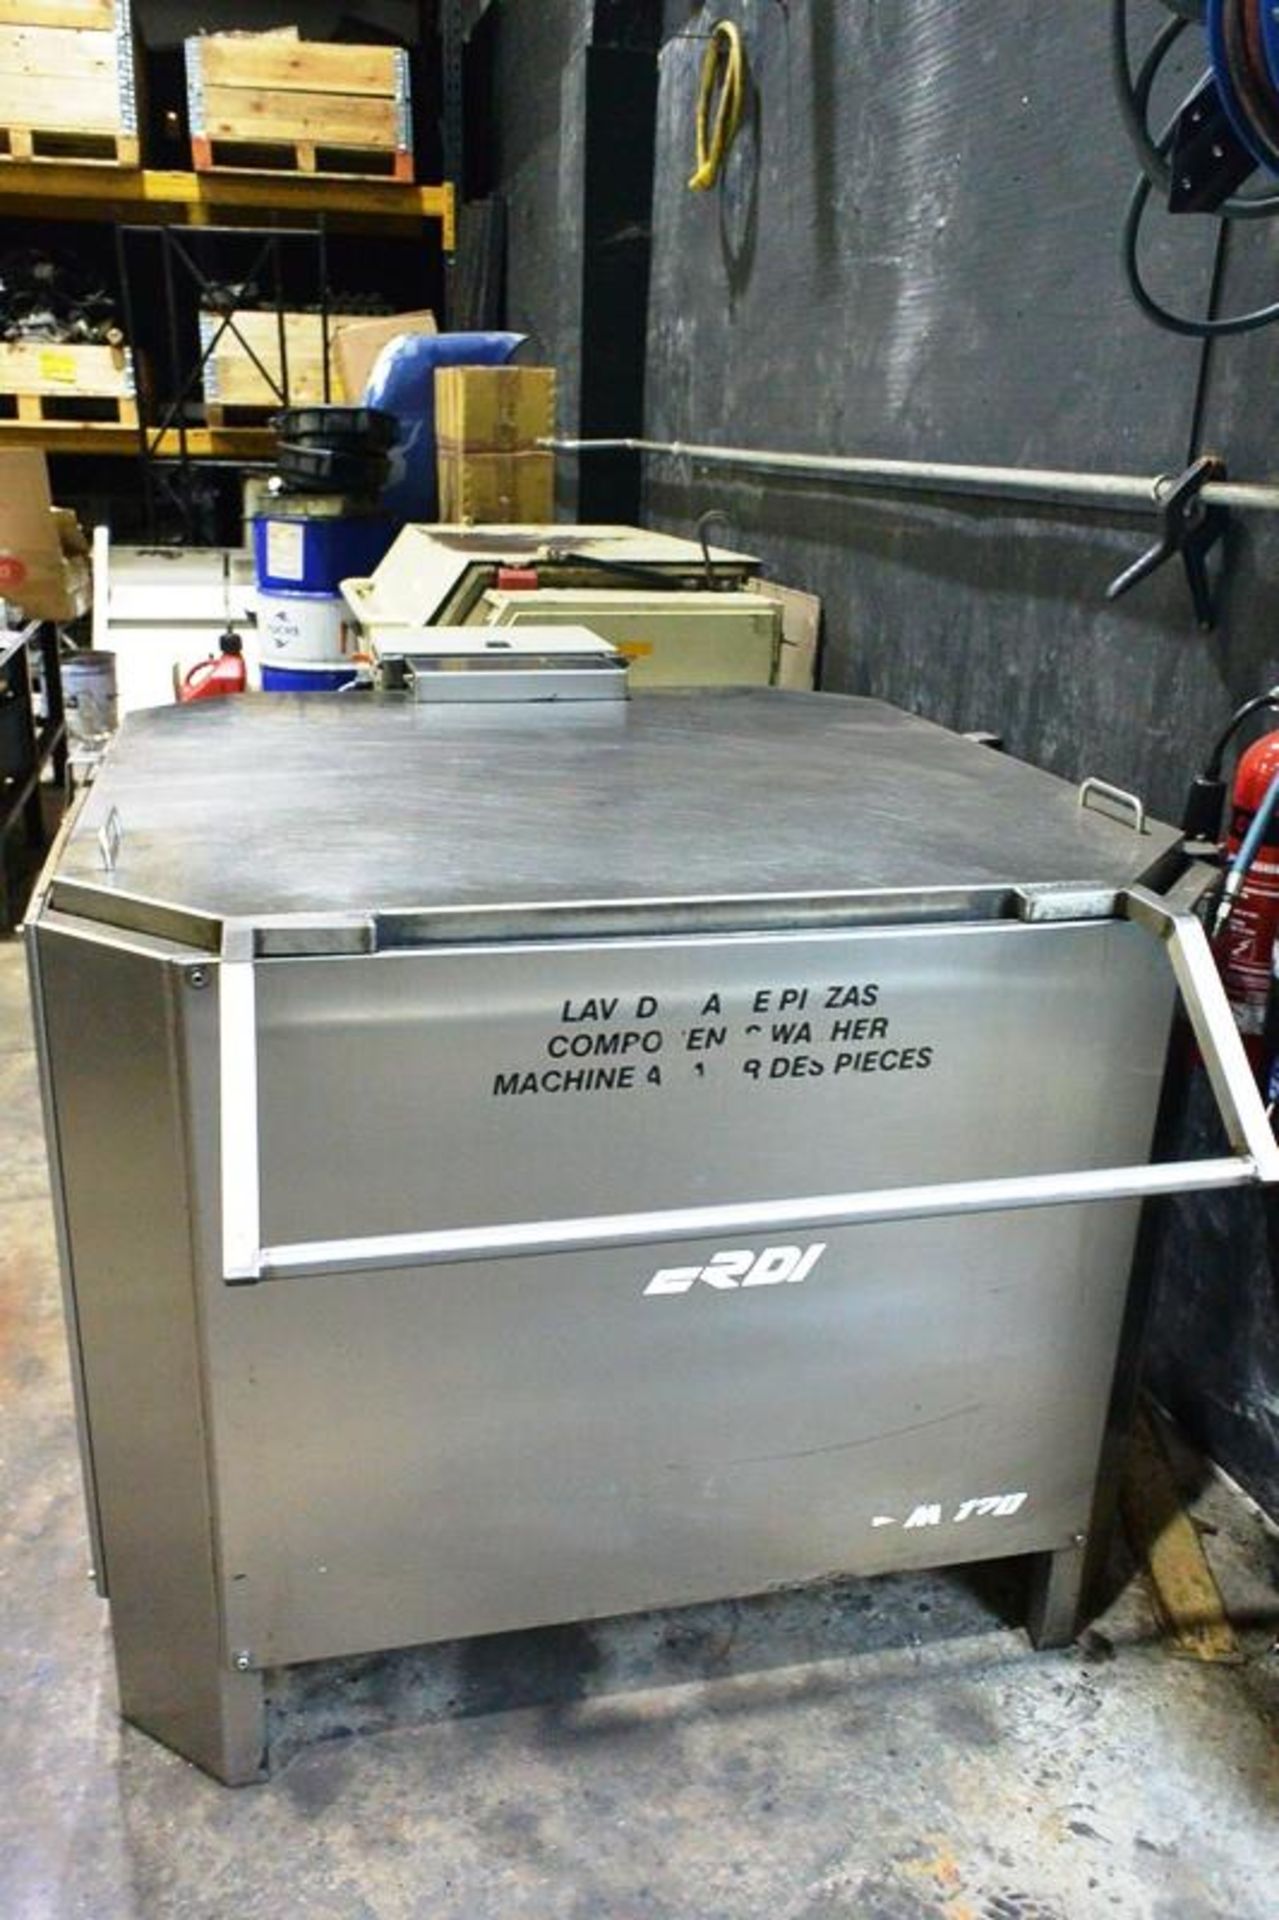 Serdi stainless steel rotary hot parts washer, approx basket dia 1100mm, 3 phase - Image 2 of 6